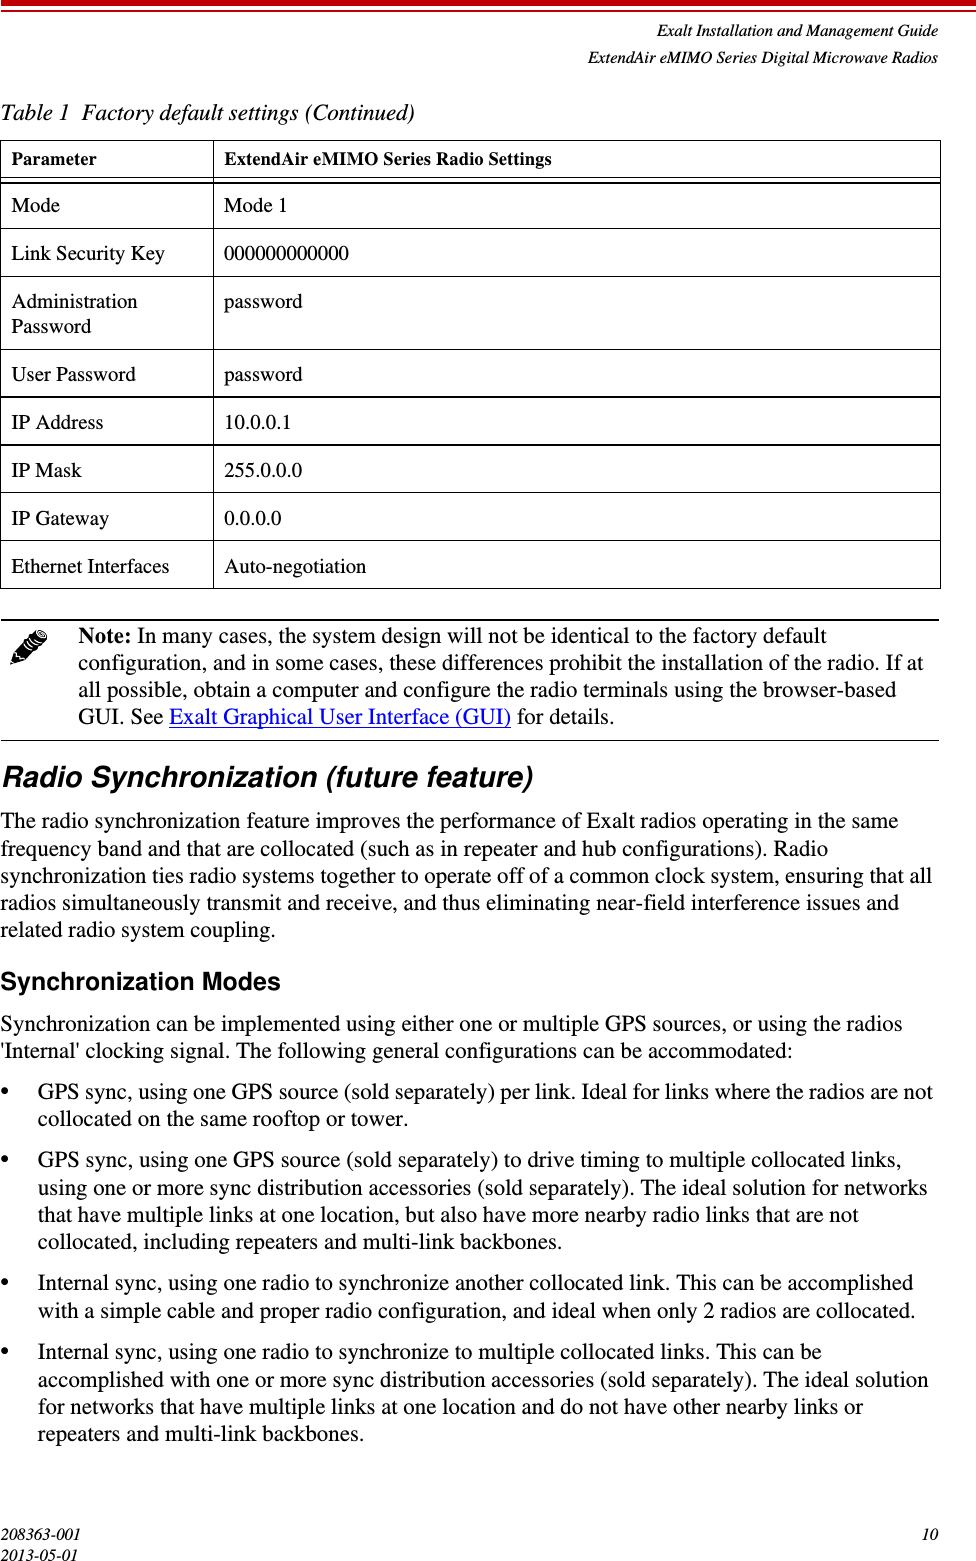 Exalt Installation and Management GuideExtendAir eMIMO Series Digital Microwave Radios208363-001 102013-05-01Radio Synchronization (future feature)The radio synchronization feature improves the performance of Exalt radios operating in the same frequency band and that are collocated (such as in repeater and hub configurations). Radio synchronization ties radio systems together to operate off of a common clock system, ensuring that all radios simultaneously transmit and receive, and thus eliminating near-field interference issues and related radio system coupling.Synchronization ModesSynchronization can be implemented using either one or multiple GPS sources, or using the radios &apos;Internal&apos; clocking signal. The following general configurations can be accommodated:•GPS sync, using one GPS source (sold separately) per link. Ideal for links where the radios are not collocated on the same rooftop or tower. •GPS sync, using one GPS source (sold separately) to drive timing to multiple collocated links, using one or more sync distribution accessories (sold separately). The ideal solution for networks that have multiple links at one location, but also have more nearby radio links that are not collocated, including repeaters and multi-link backbones.•Internal sync, using one radio to synchronize another collocated link. This can be accomplished with a simple cable and proper radio configuration, and ideal when only 2 radios are collocated.•Internal sync, using one radio to synchronize to multiple collocated links. This can be accomplished with one or more sync distribution accessories (sold separately). The ideal solution for networks that have multiple links at one location and do not have other nearby links or repeaters and multi-link backbones.Mode Mode 1Link Security Key 000000000000Administration Password passwordUser Password passwordIP Address 10.0.0.1IP Mask 255.0.0.0IP Gateway 0.0.0.0Ethernet Interfaces Auto-negotiationNote: In many cases, the system design will not be identical to the factory default configuration, and in some cases, these differences prohibit the installation of the radio. If at all possible, obtain a computer and configure the radio terminals using the browser-based GUI. See Exalt Graphical User Interface (GUI) for details.Table 1  Factory default settings (Continued)Parameter ExtendAir eMIMO Series Radio Settings